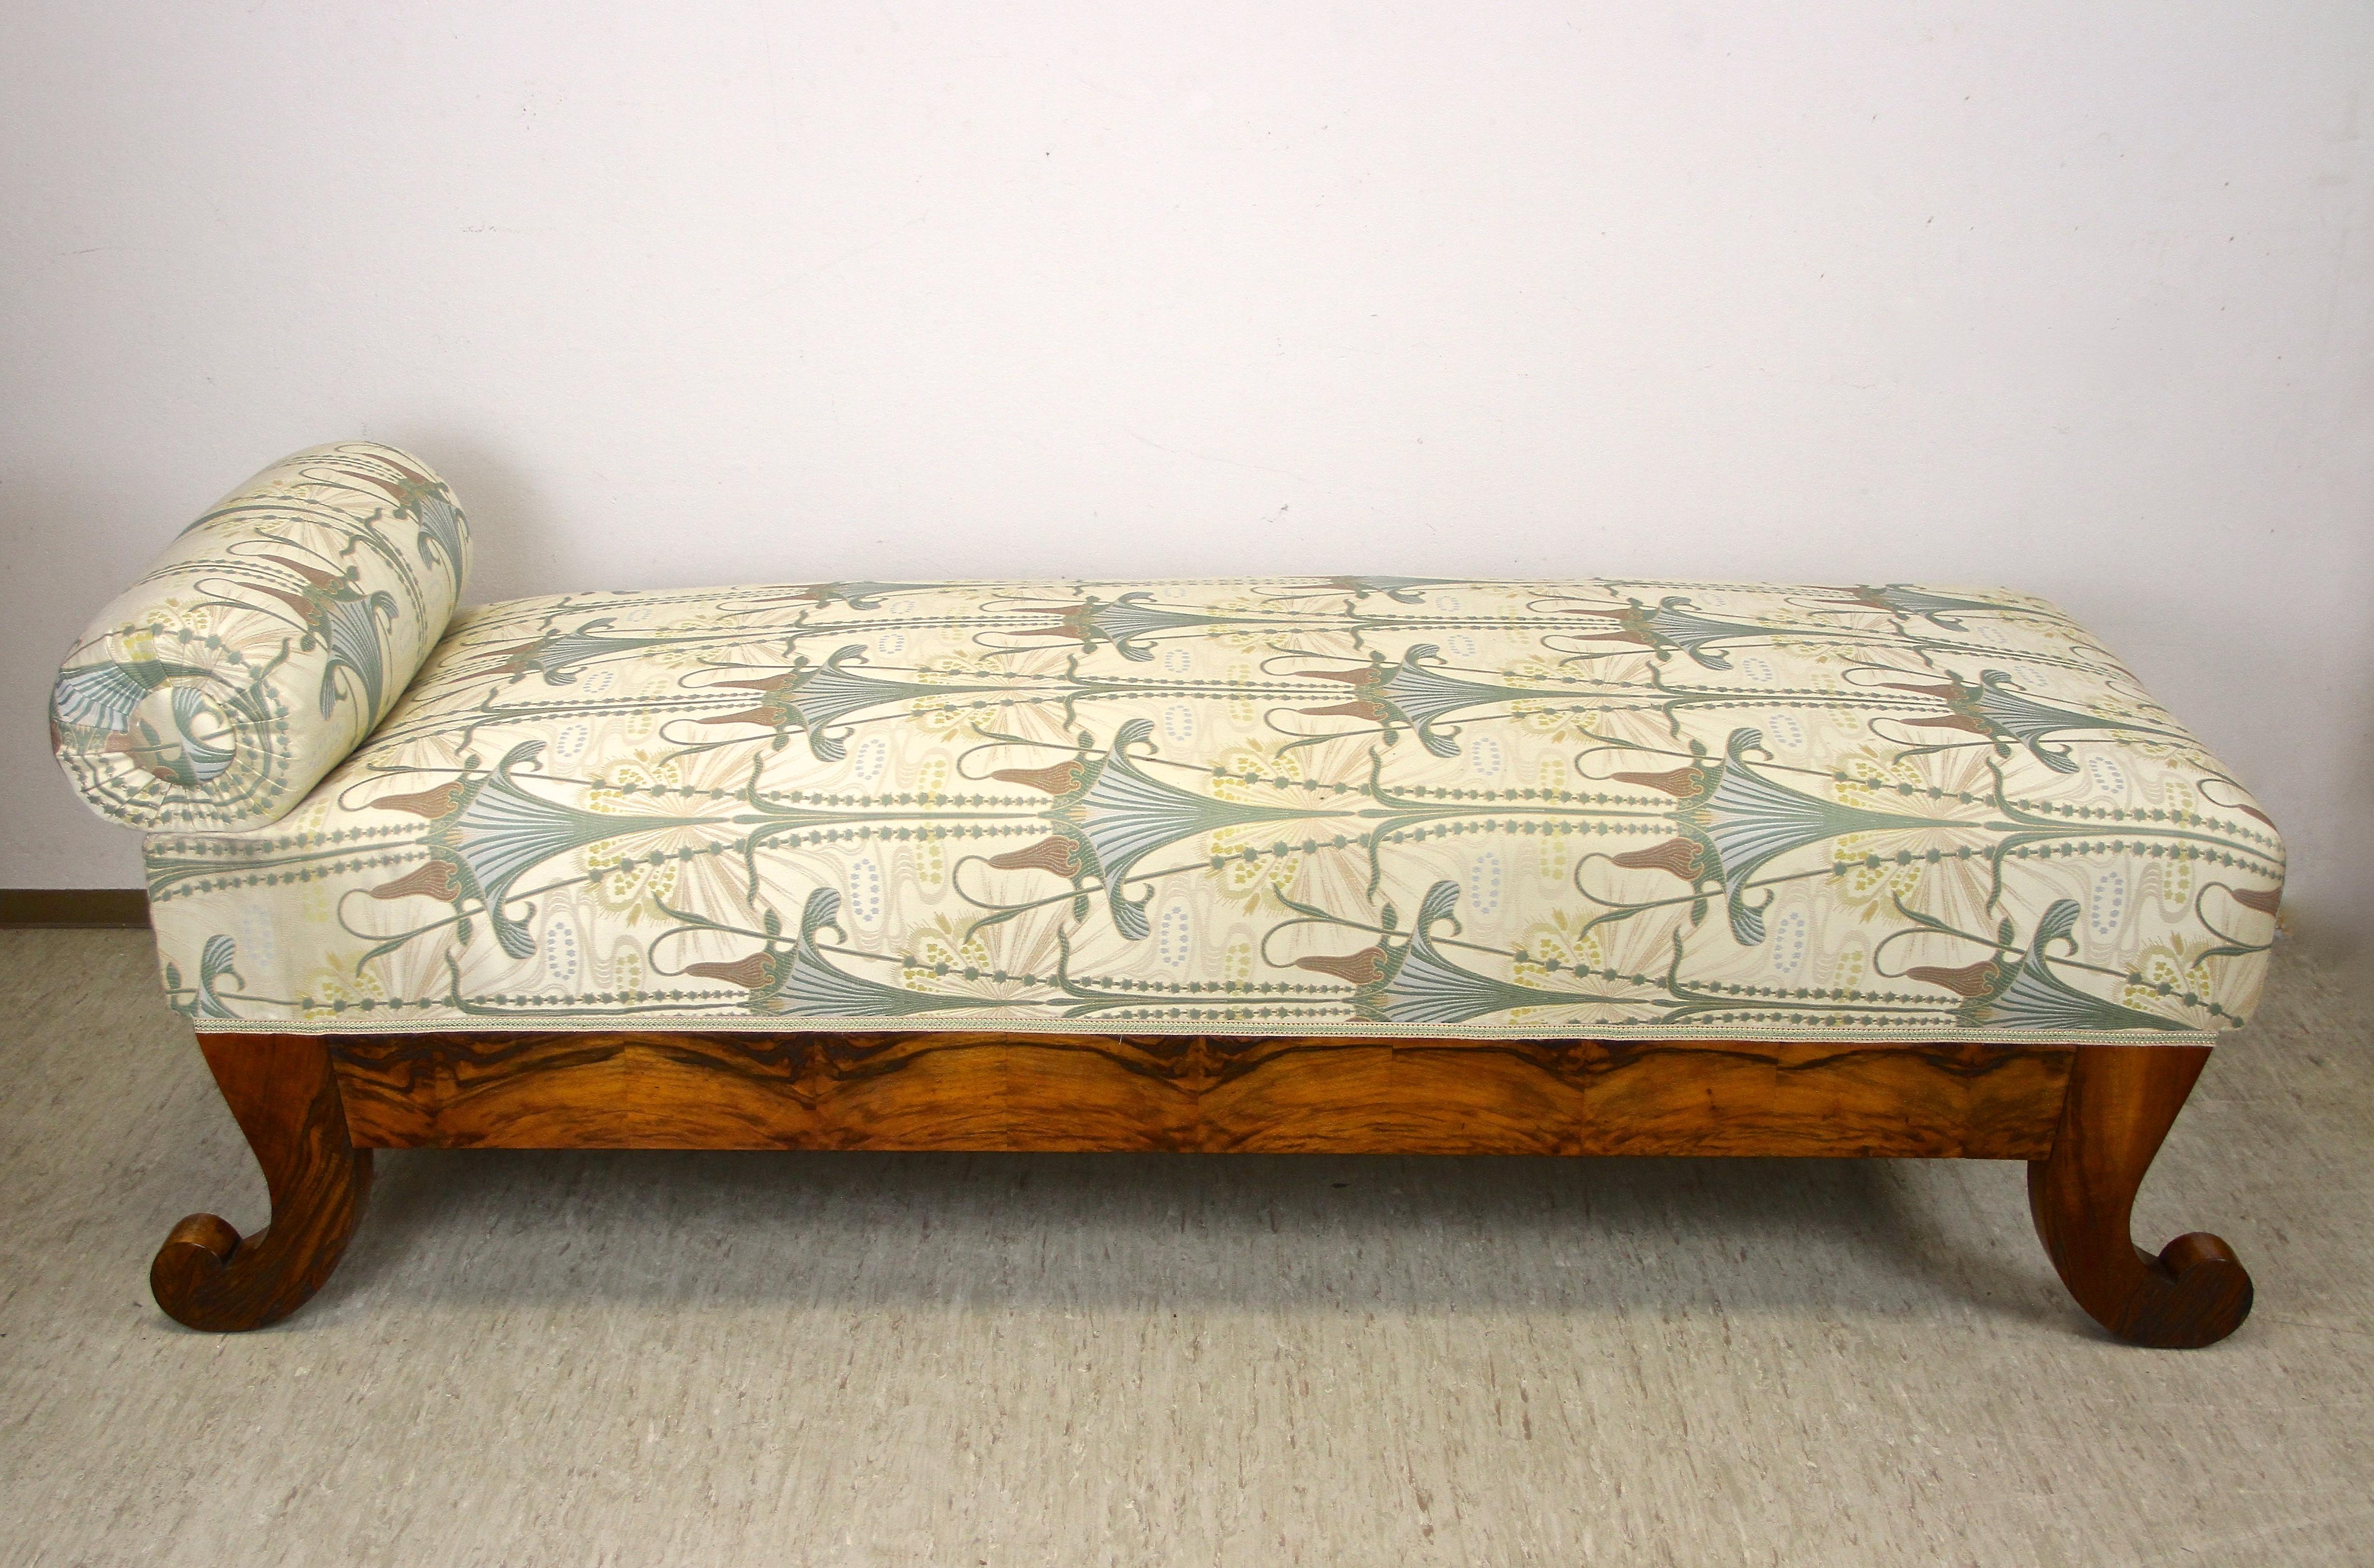 Beautiful Nutwood Biedermeier chaise lounge from the period around 1850 in Austria. This fantastic designed daybed comes with a comfortable spring core and has been newly upholstered with a marvelous floral Backhausen fabric. The substructure made